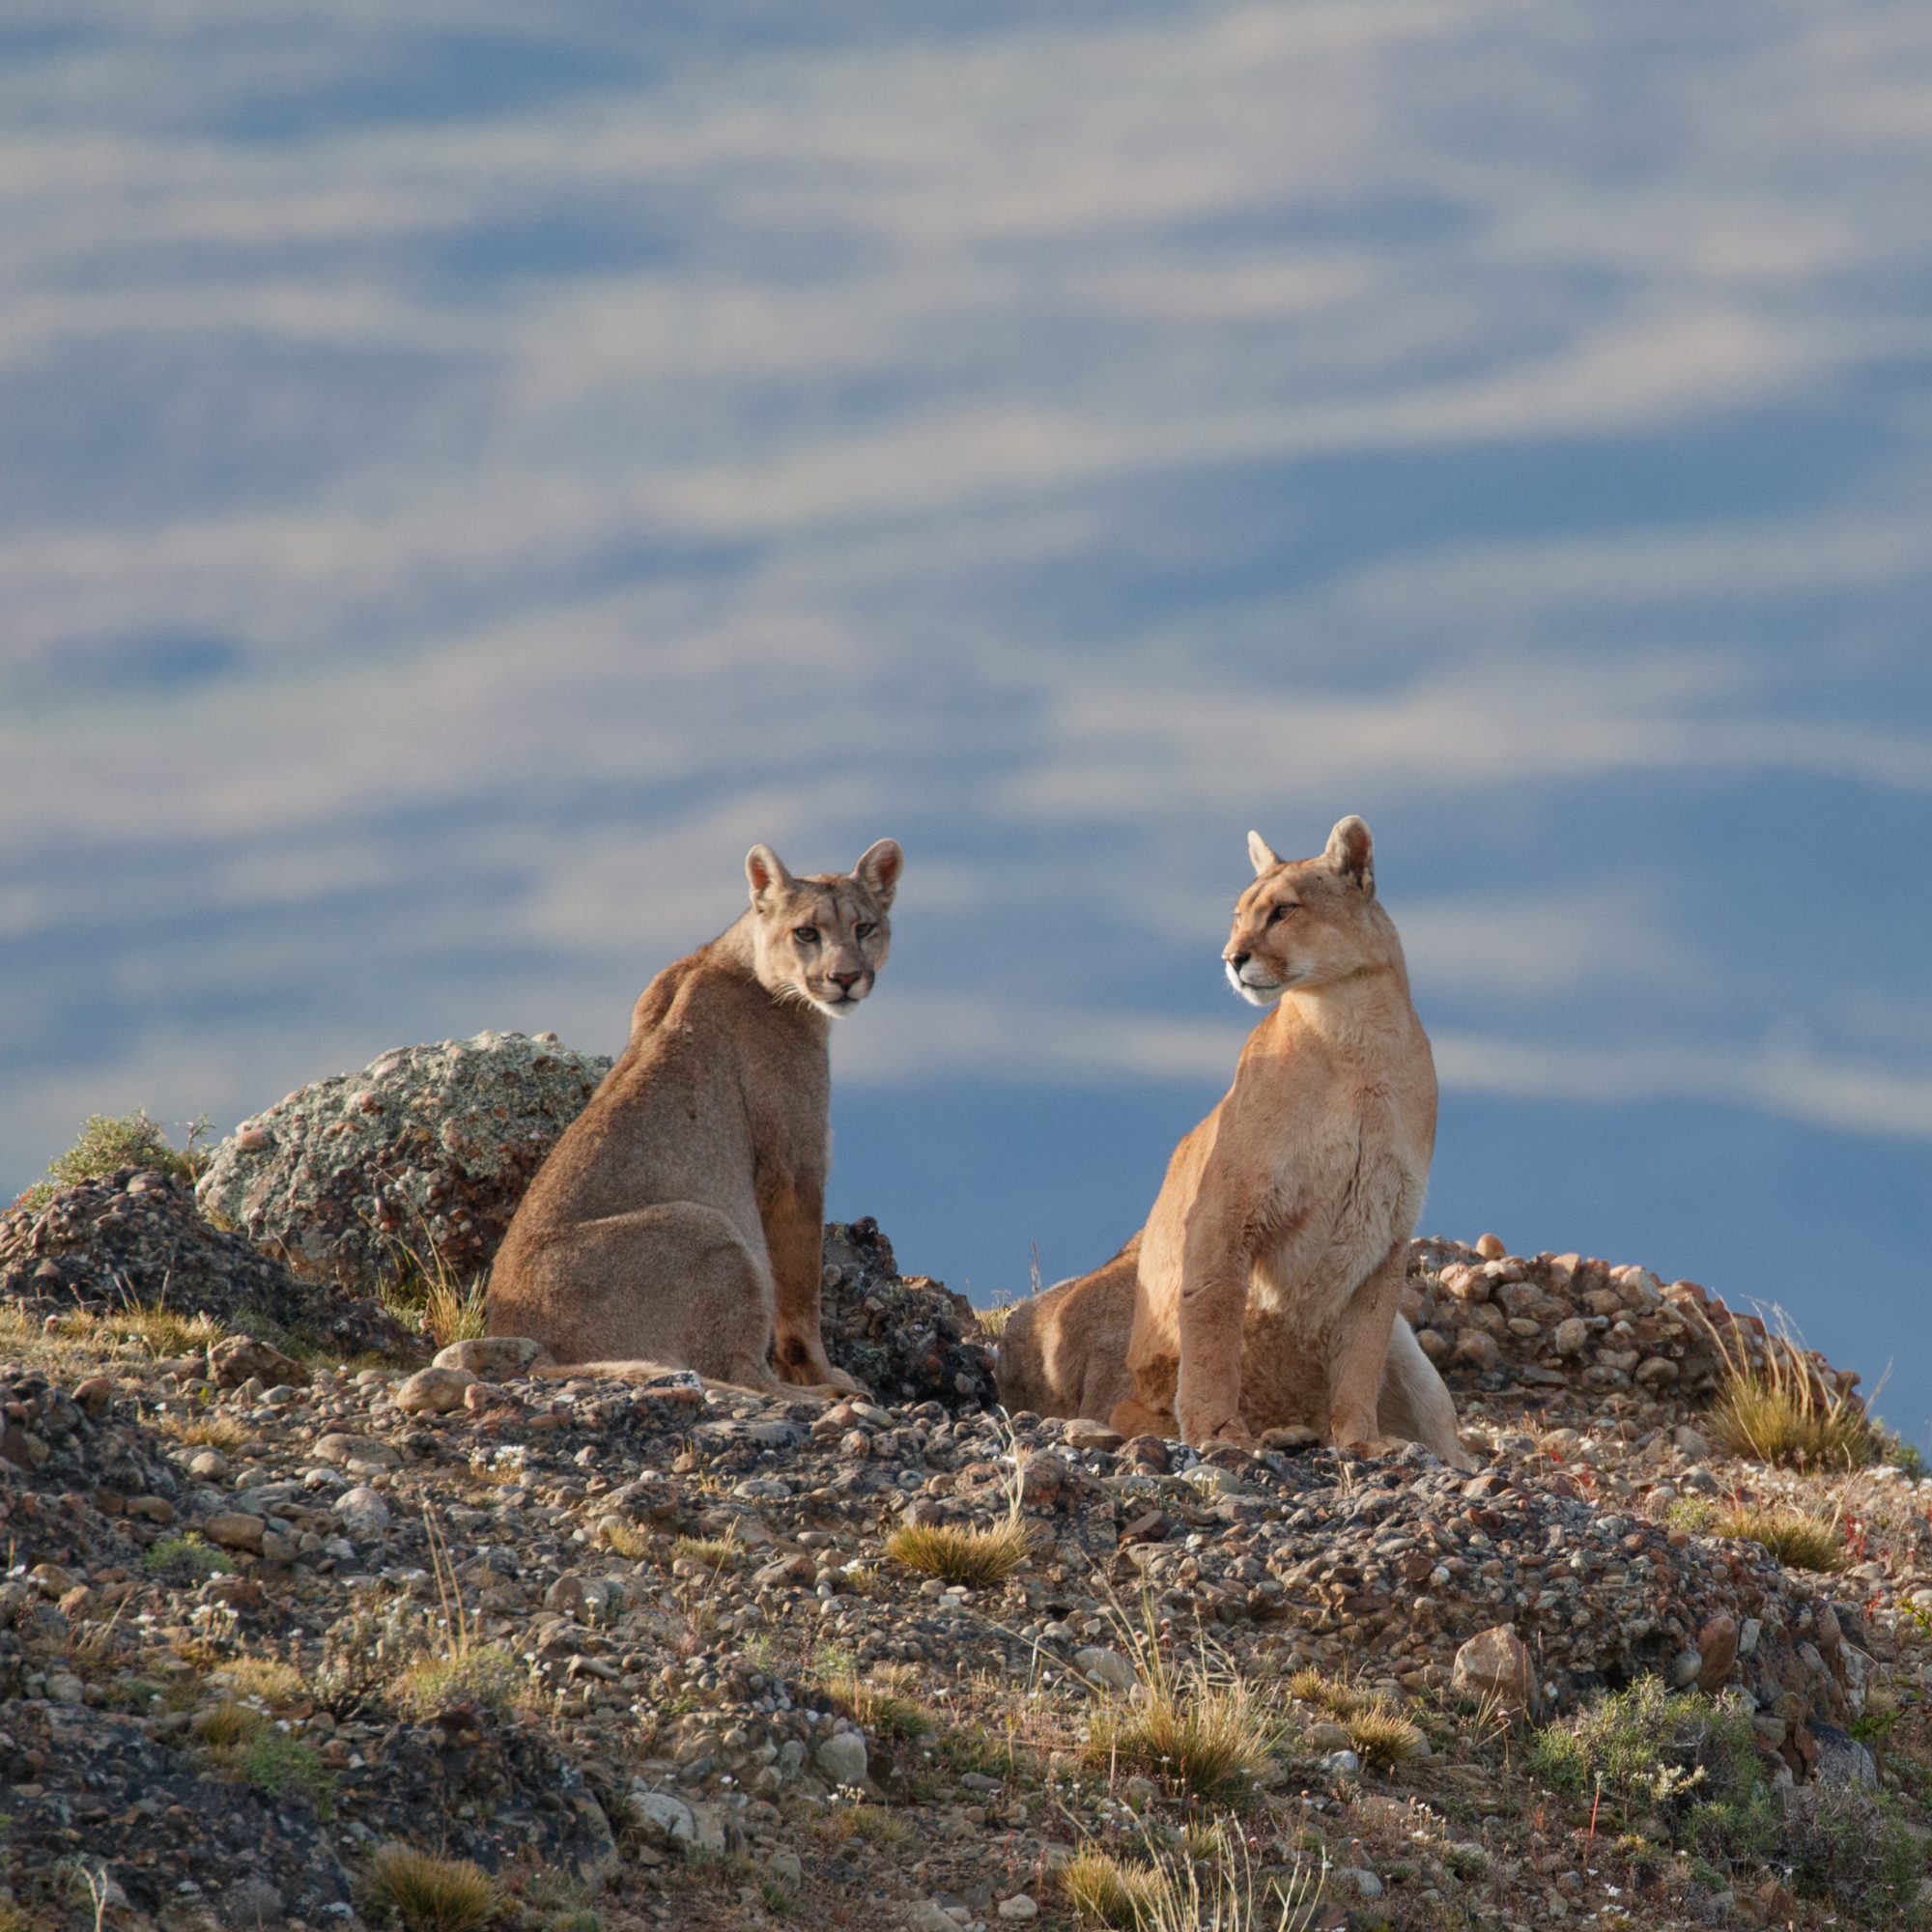 Puma family on a rocky outcrop – Patagonia, Chile 2018